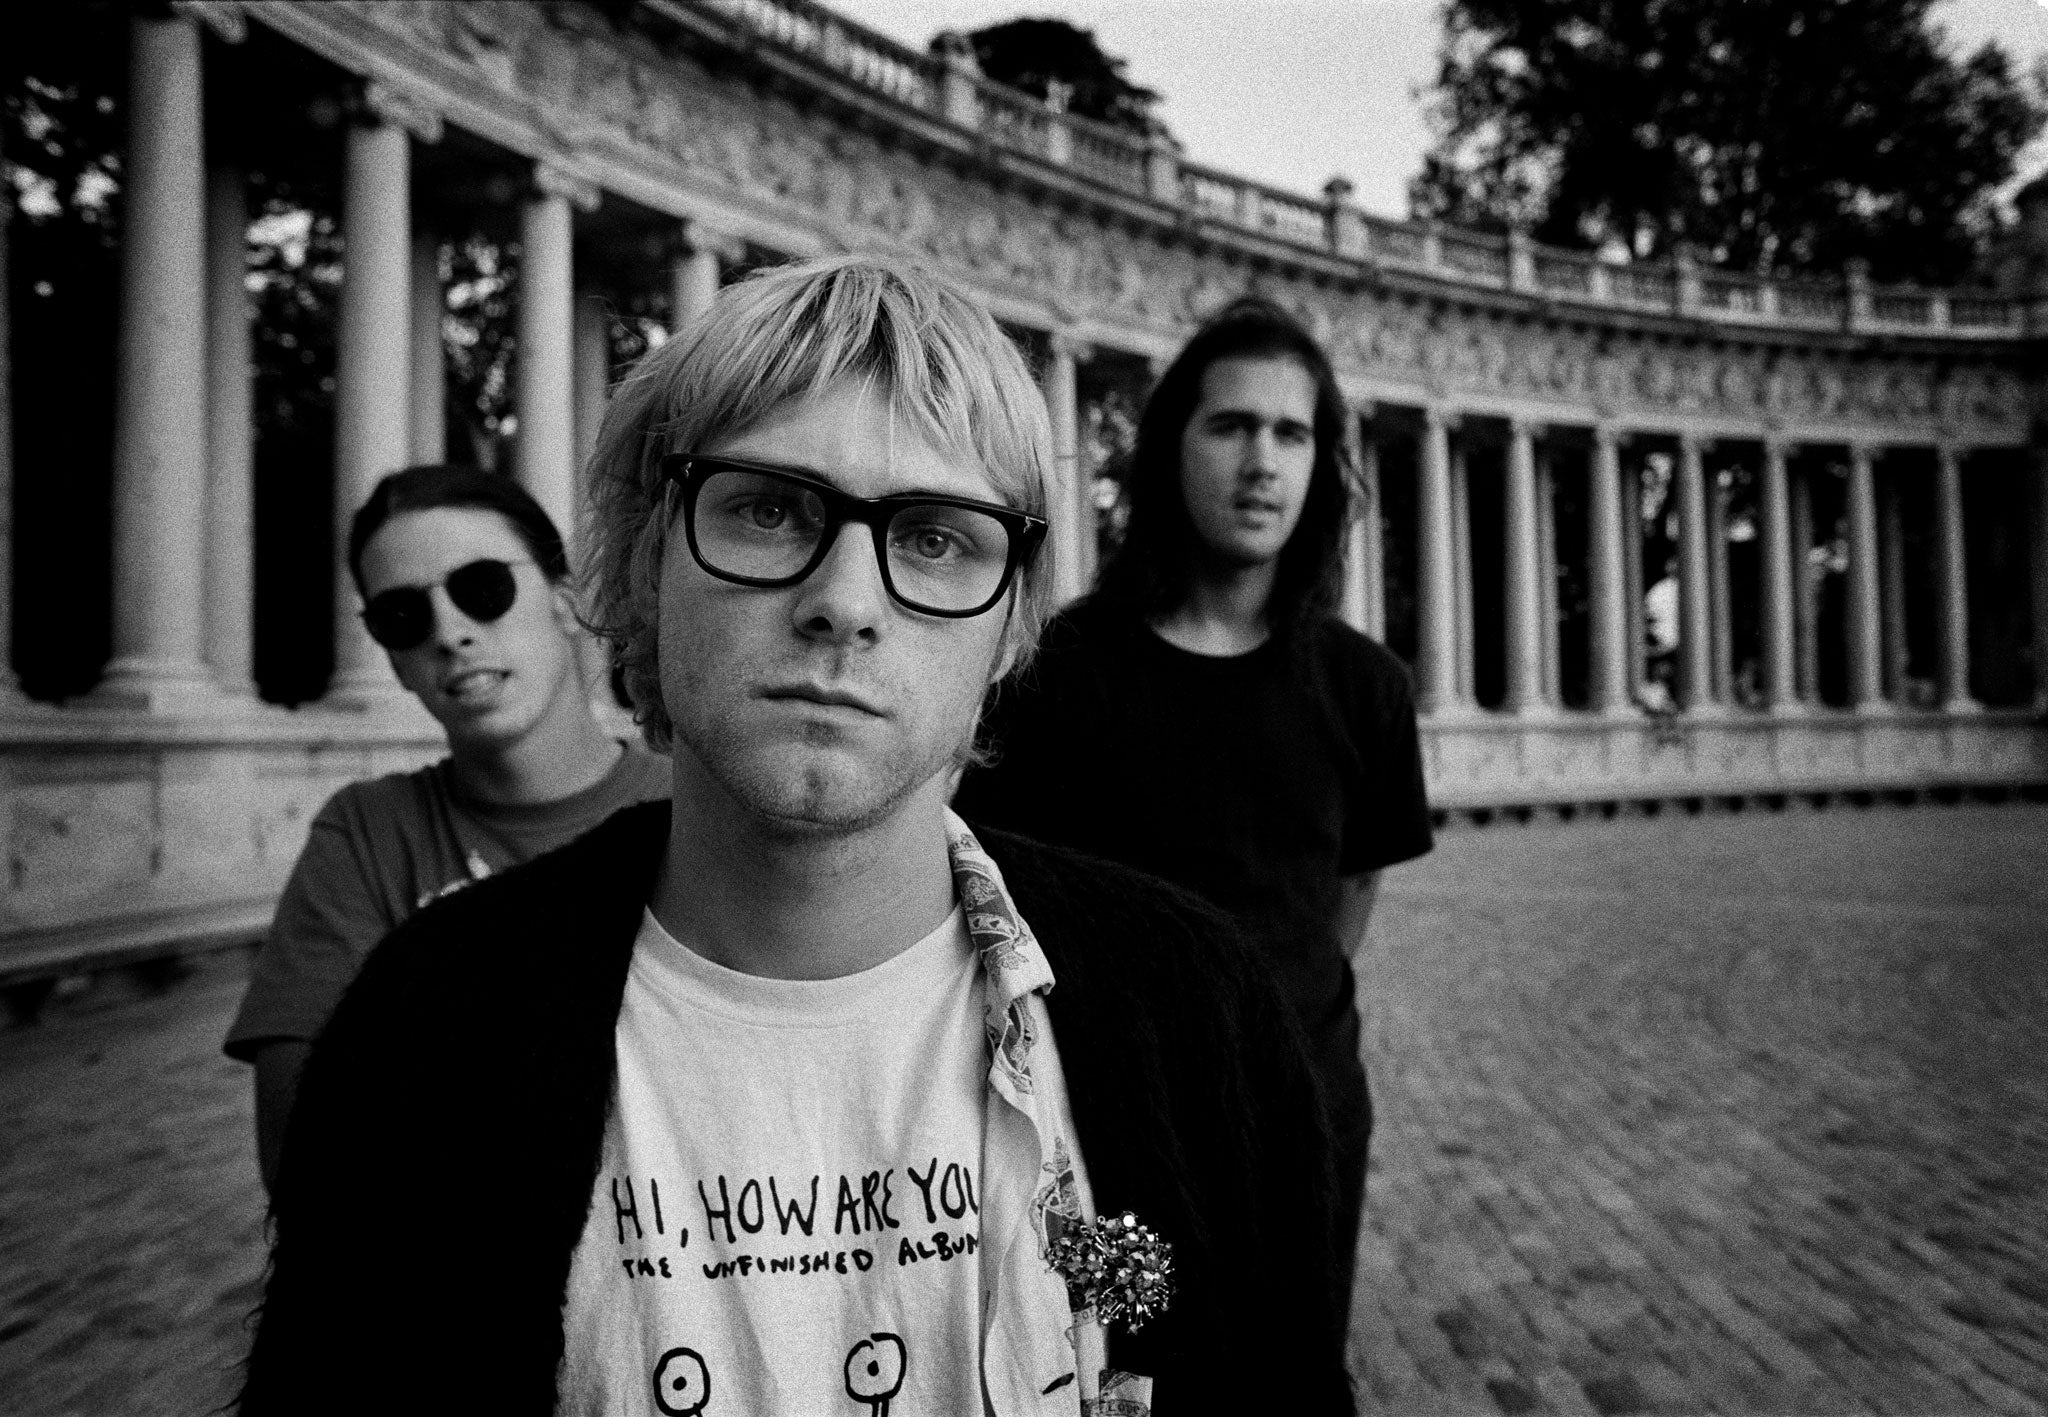 Charles Peterson and Steve Double's photographs of Kurt Cobain and Nirvana are on display in London's Proud Camden